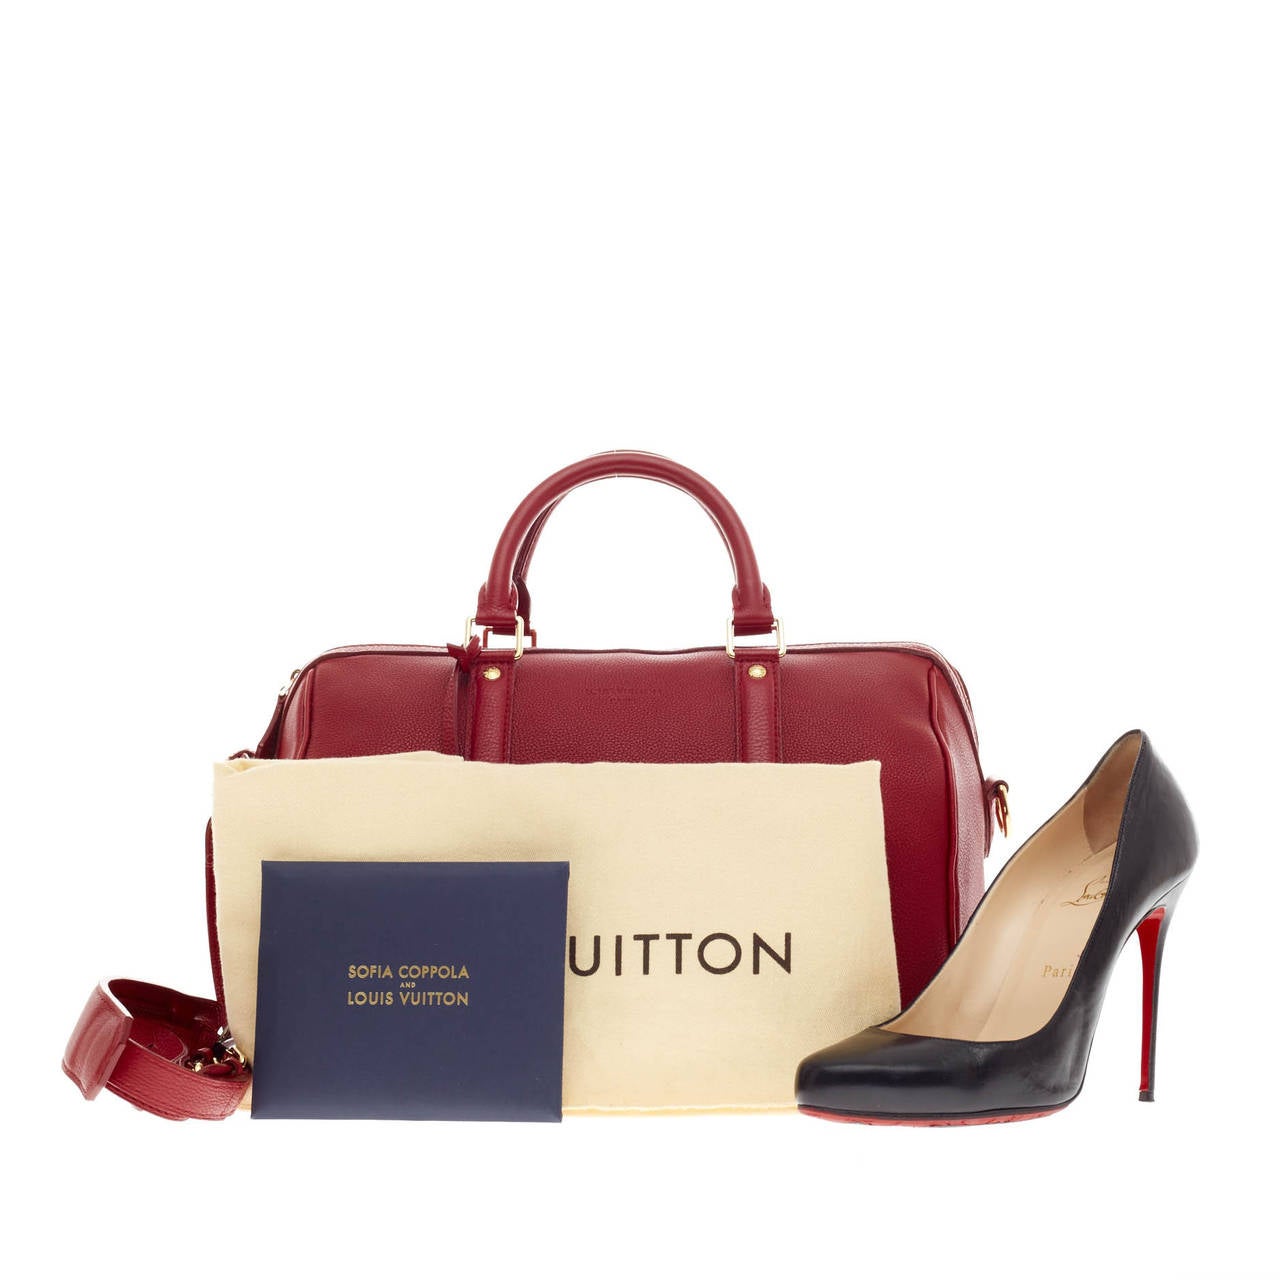 This authentic Louis Vuitton Sofia Coppola SC Bag Veau Cachemire Leather in PM is as stylish and elegant as its designer. Crafted in supple red leather, this simple yet refined duffle bag features sturdy rolled handles and adjustable shoulder strap